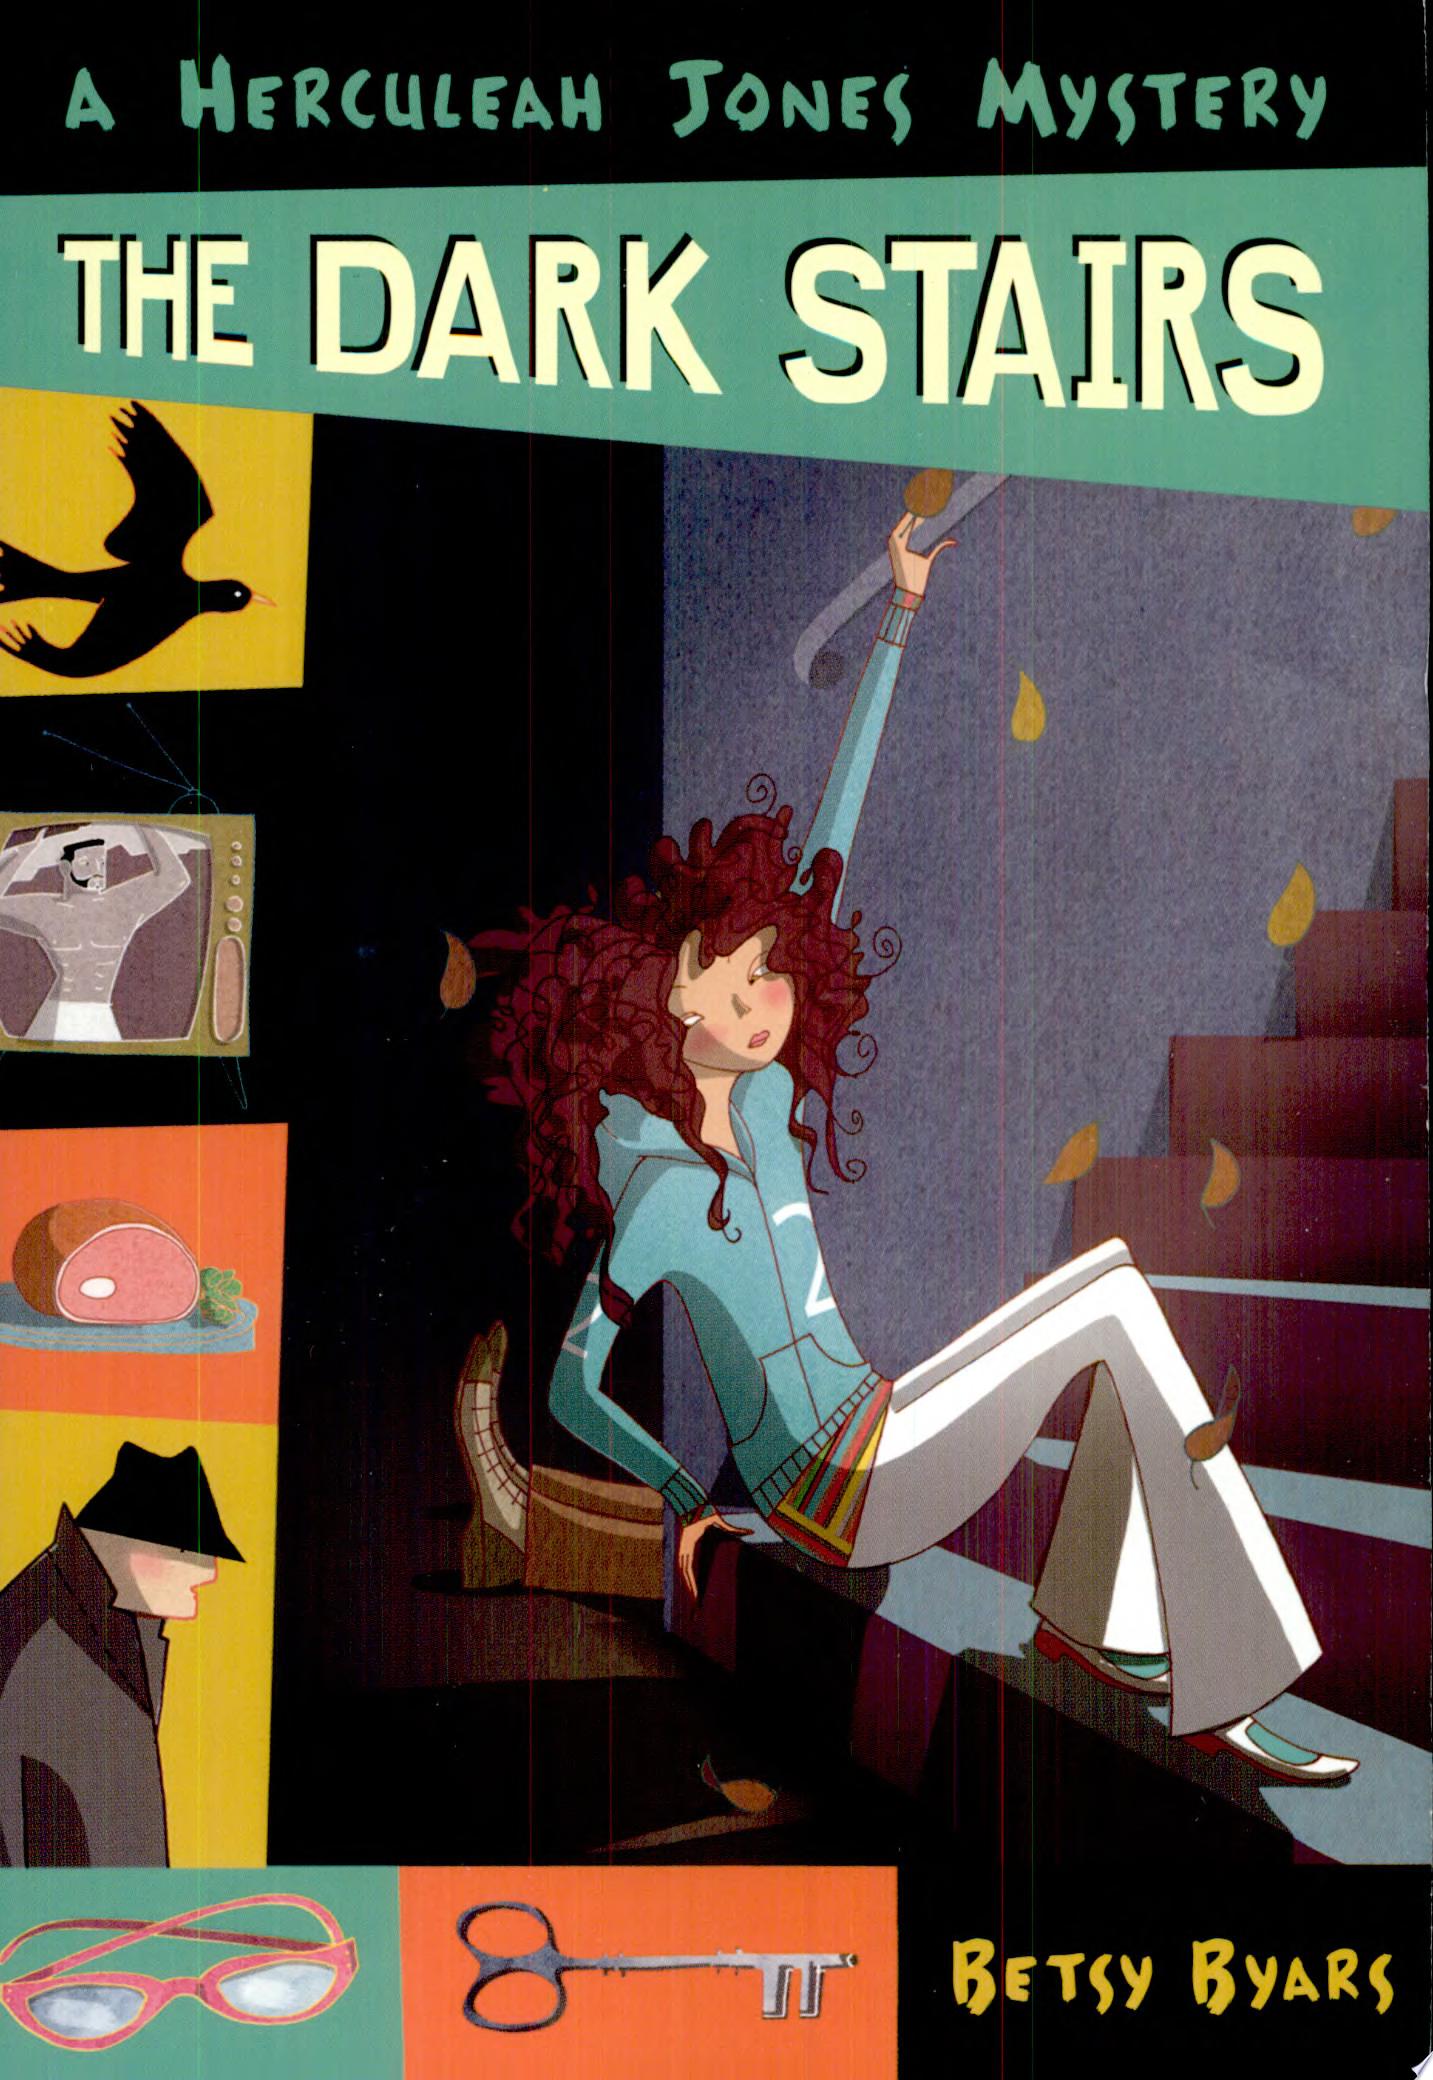 Image for "The Dark Stairs"